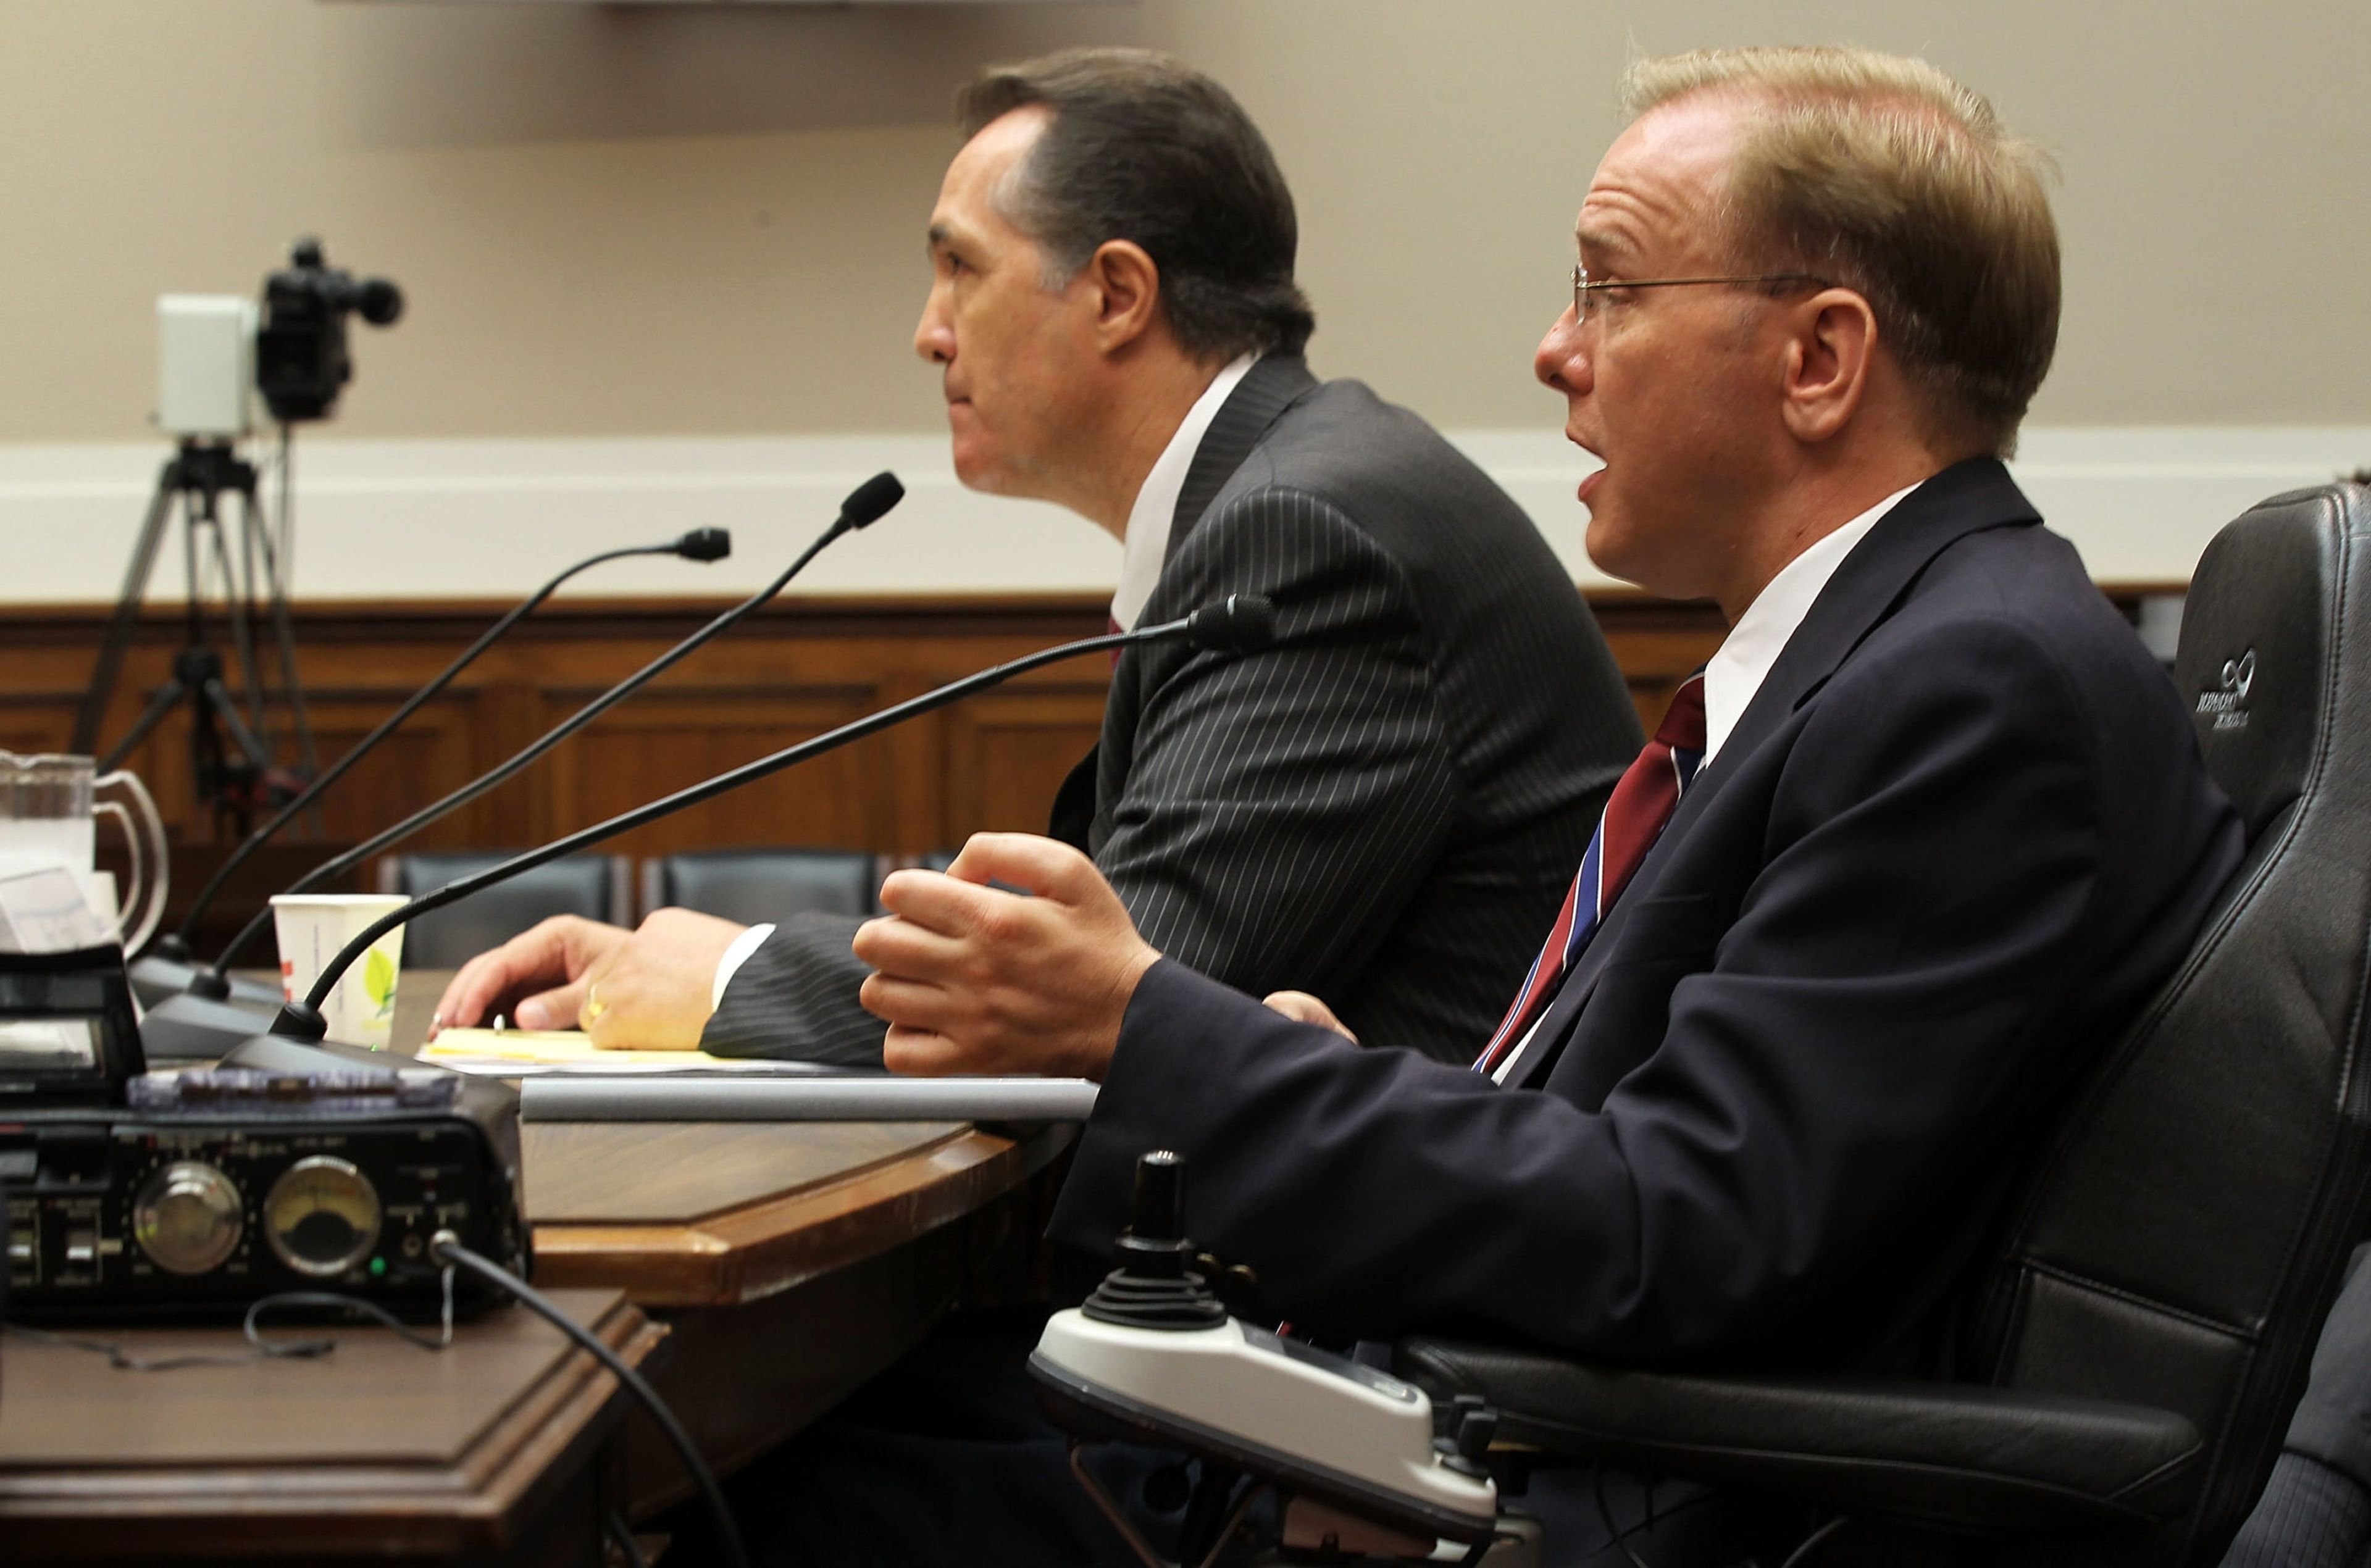 U.S. Rep. Jim Langevin, D-R.I., testifies during a hearing before the Energy and Power Subcommittee of the House Energy and Commerce Committee on May 31, 2011, on Capitol Hill in Washington. Langevin and Republican John Katko, R-N.Y., are among a number of cyber-focused lawmakers who have left Congress in recent years. (Photo by Alex Wong/Getty Ima...